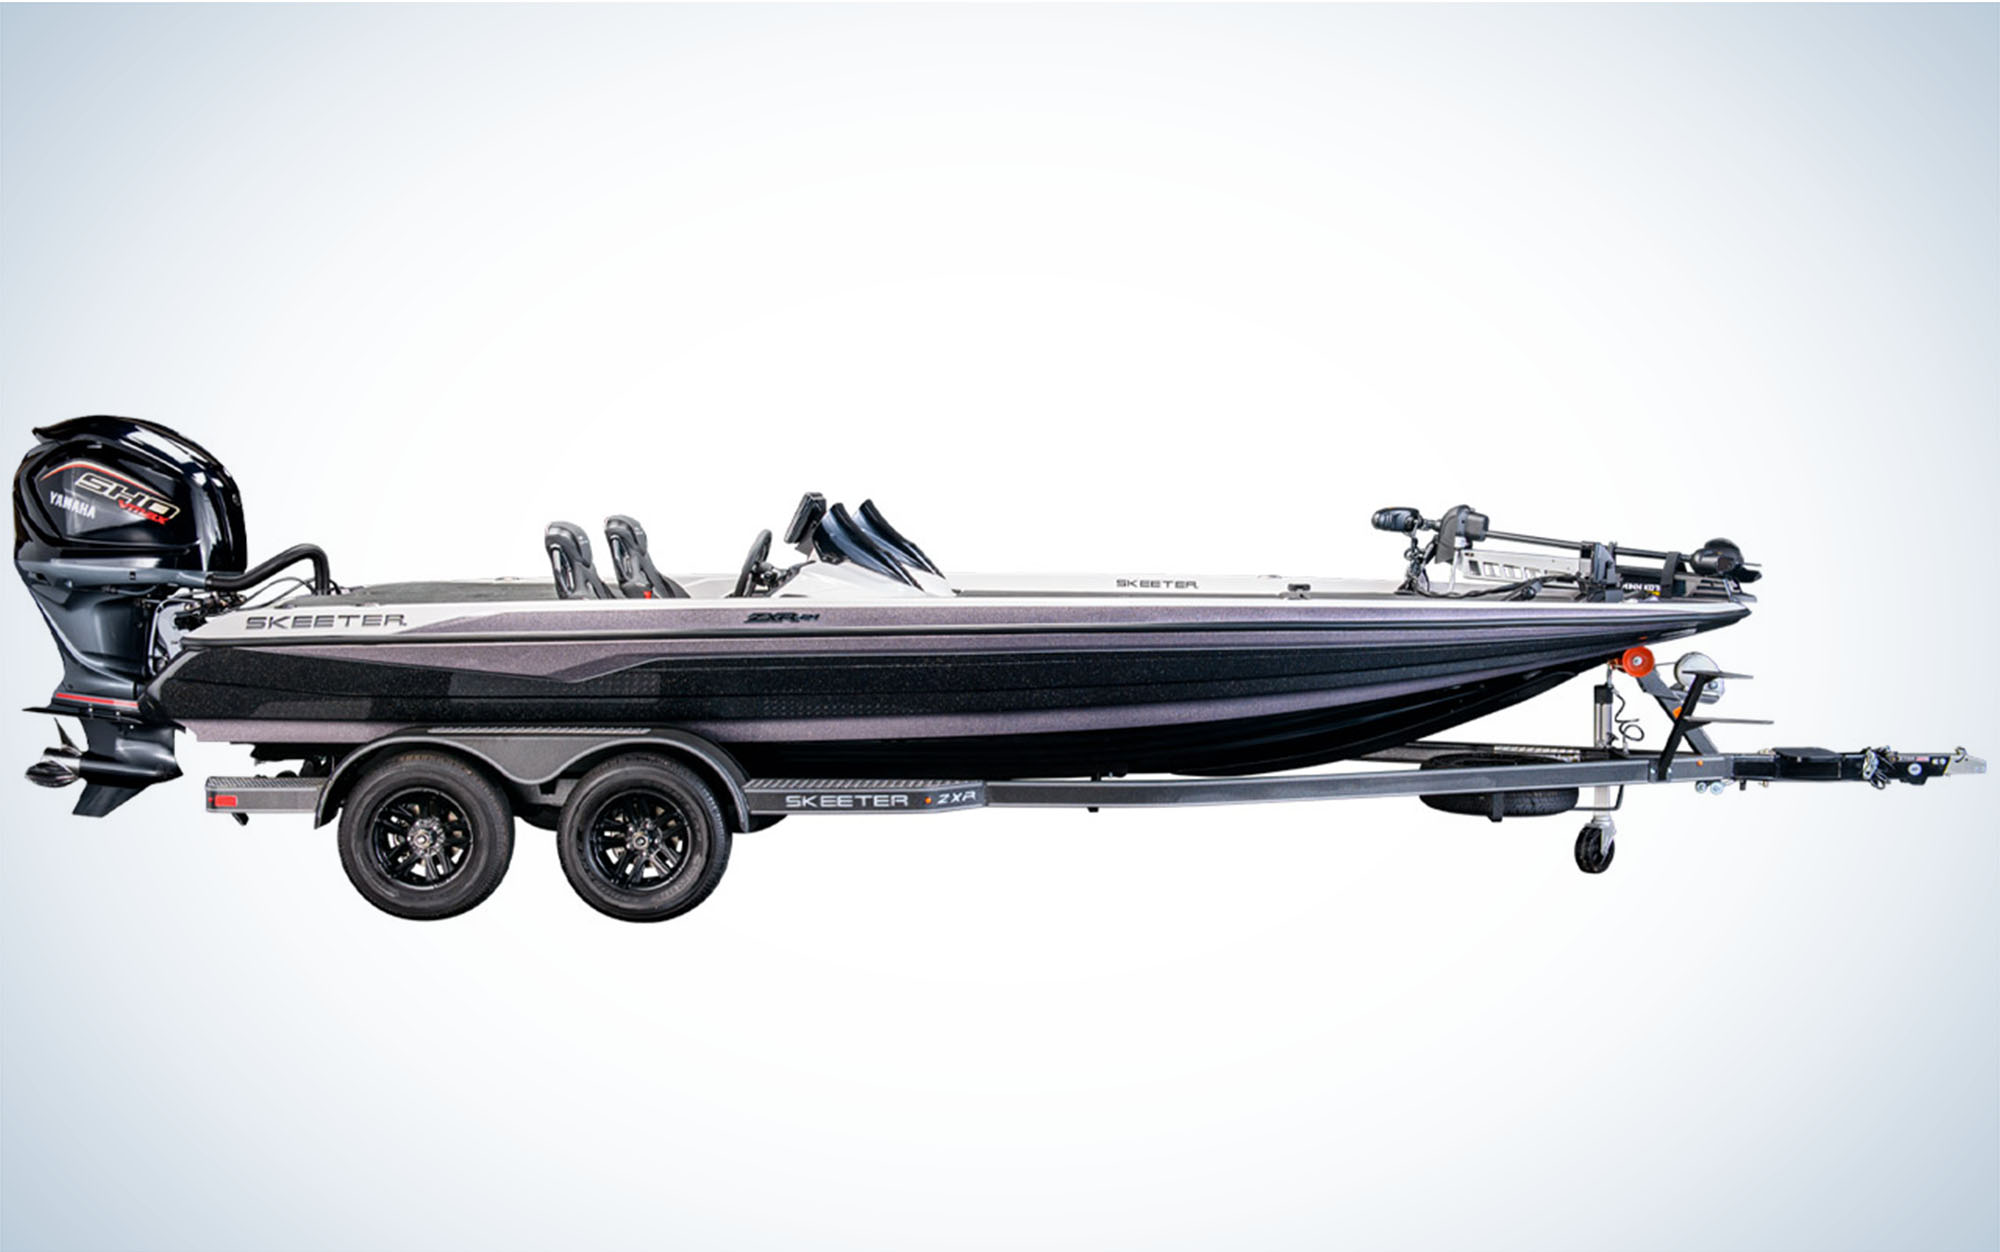 The Skeeter ZXR19 is one of the best bass boats.